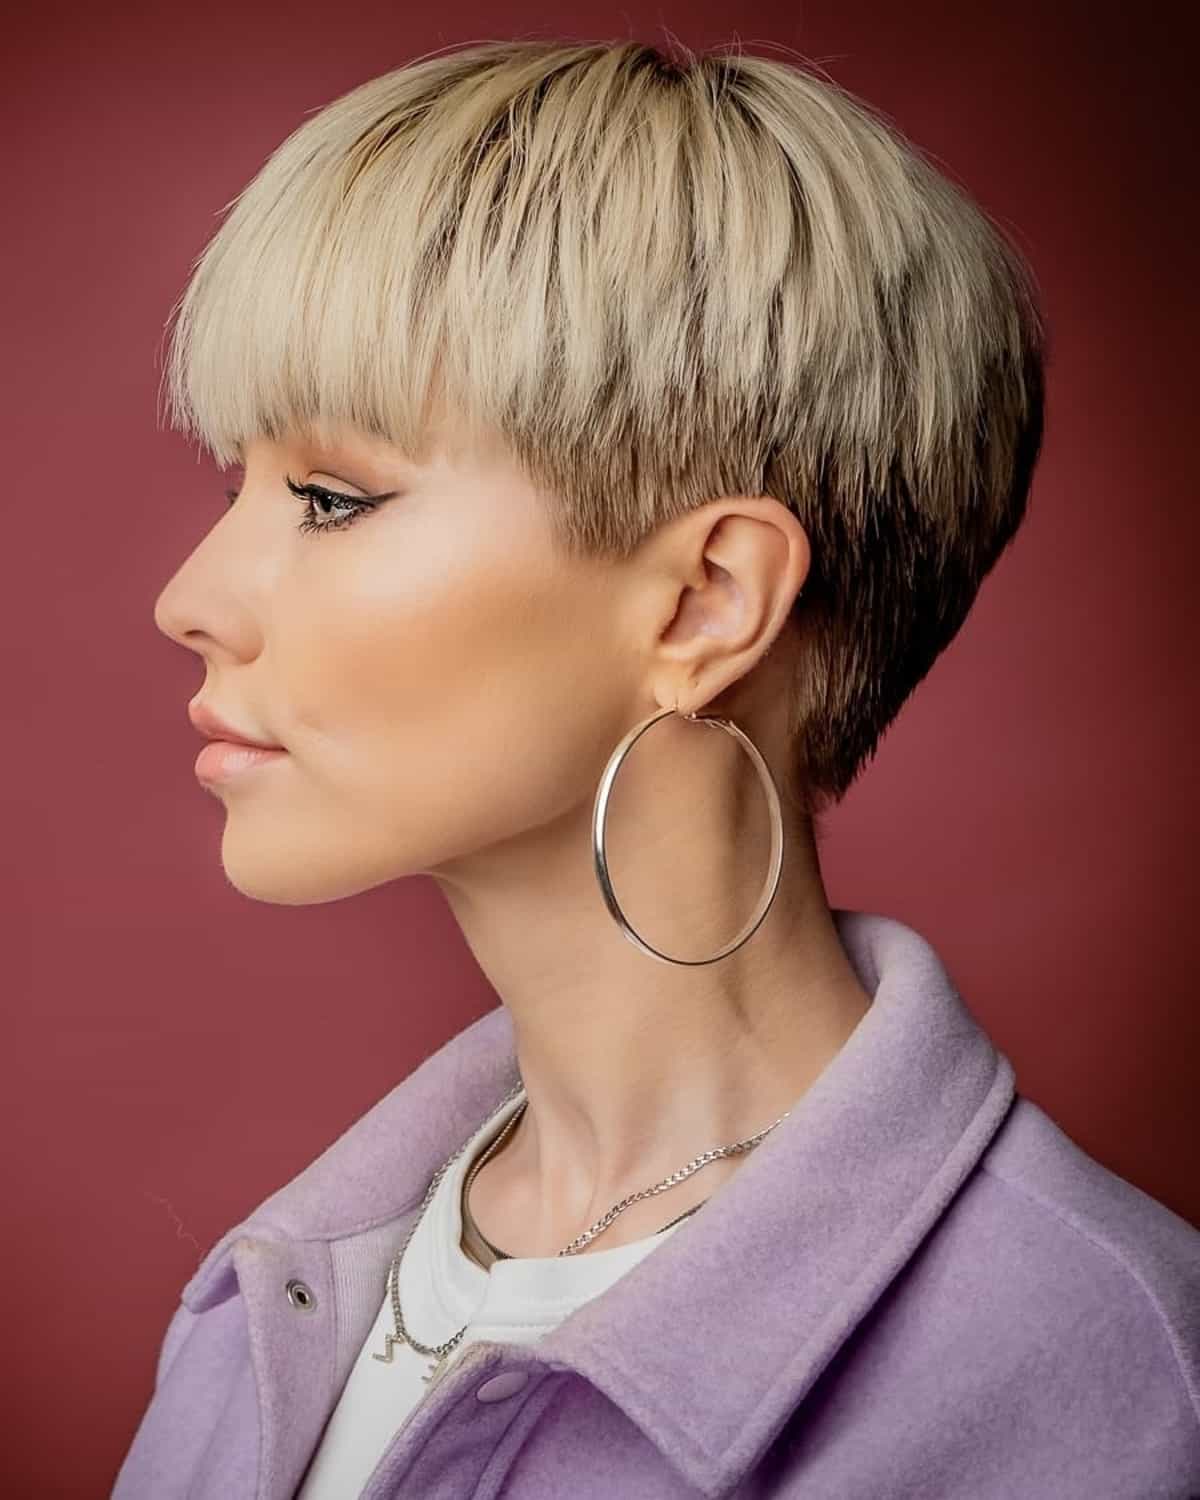 53 Textured Pixie Cut Ideas for a Messy, Modern Look